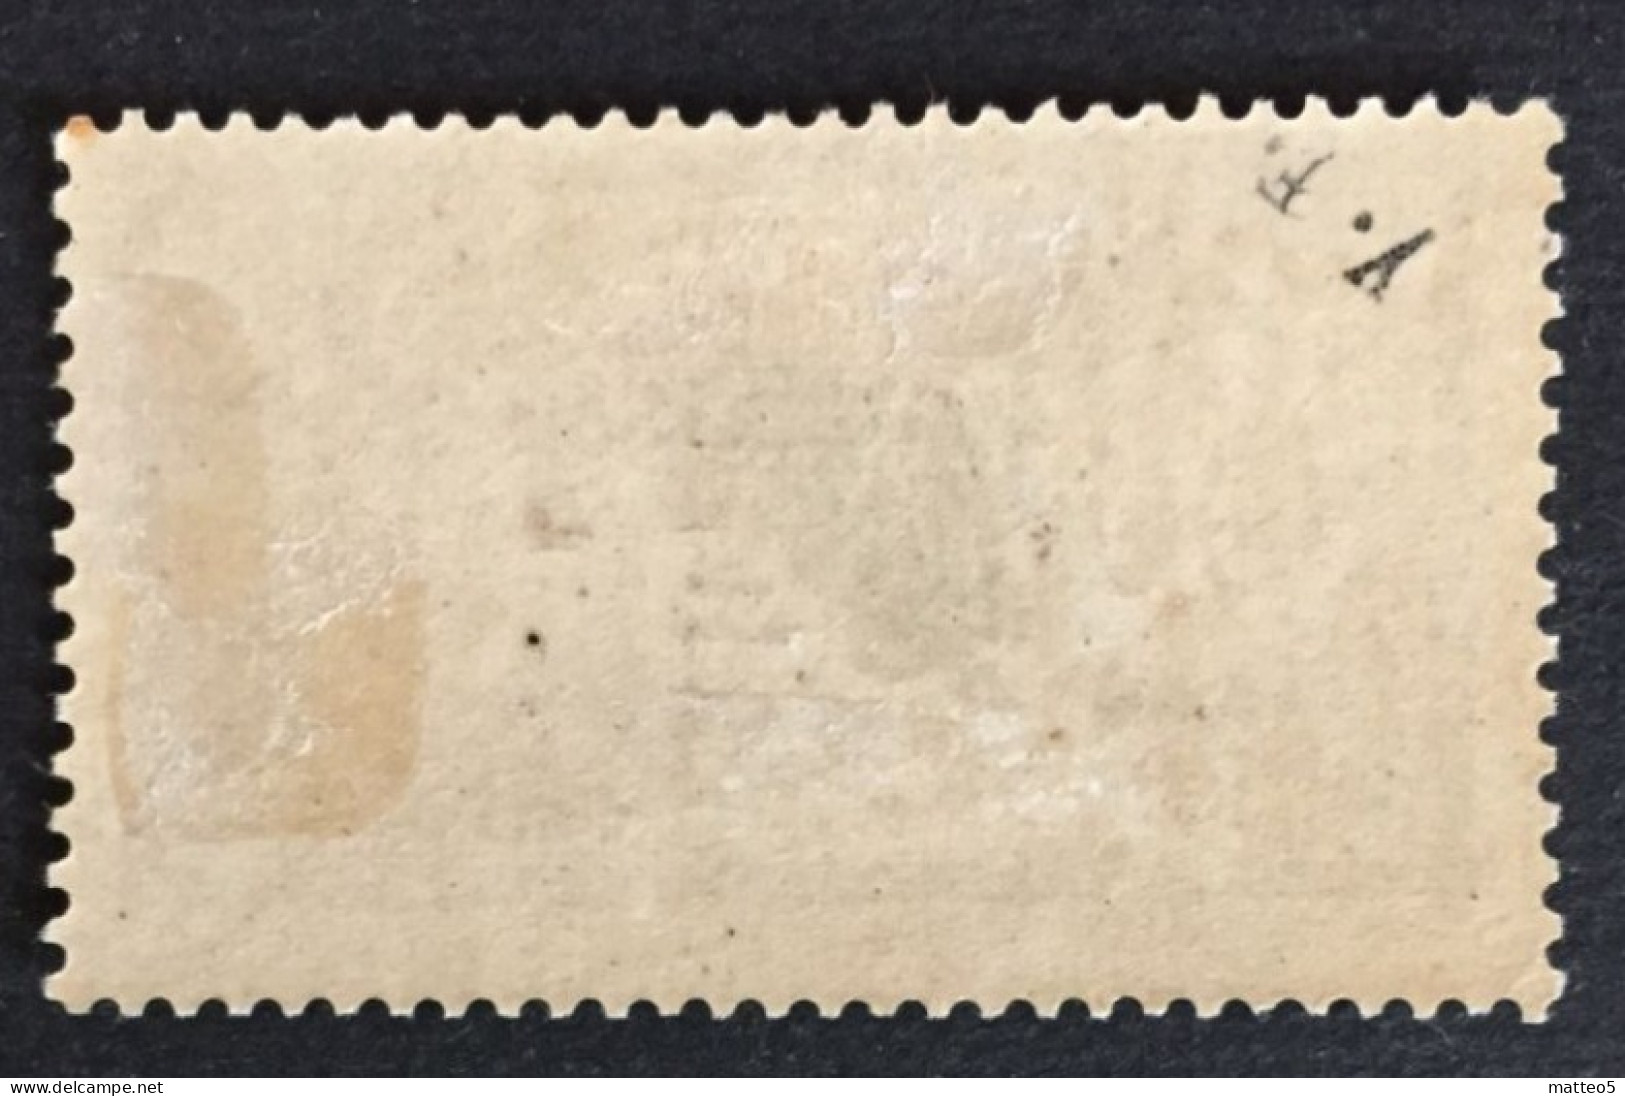 1907 - China French Post Office - Type Merson - Definitives Surcharged New Valve  - Unused - Nuovi